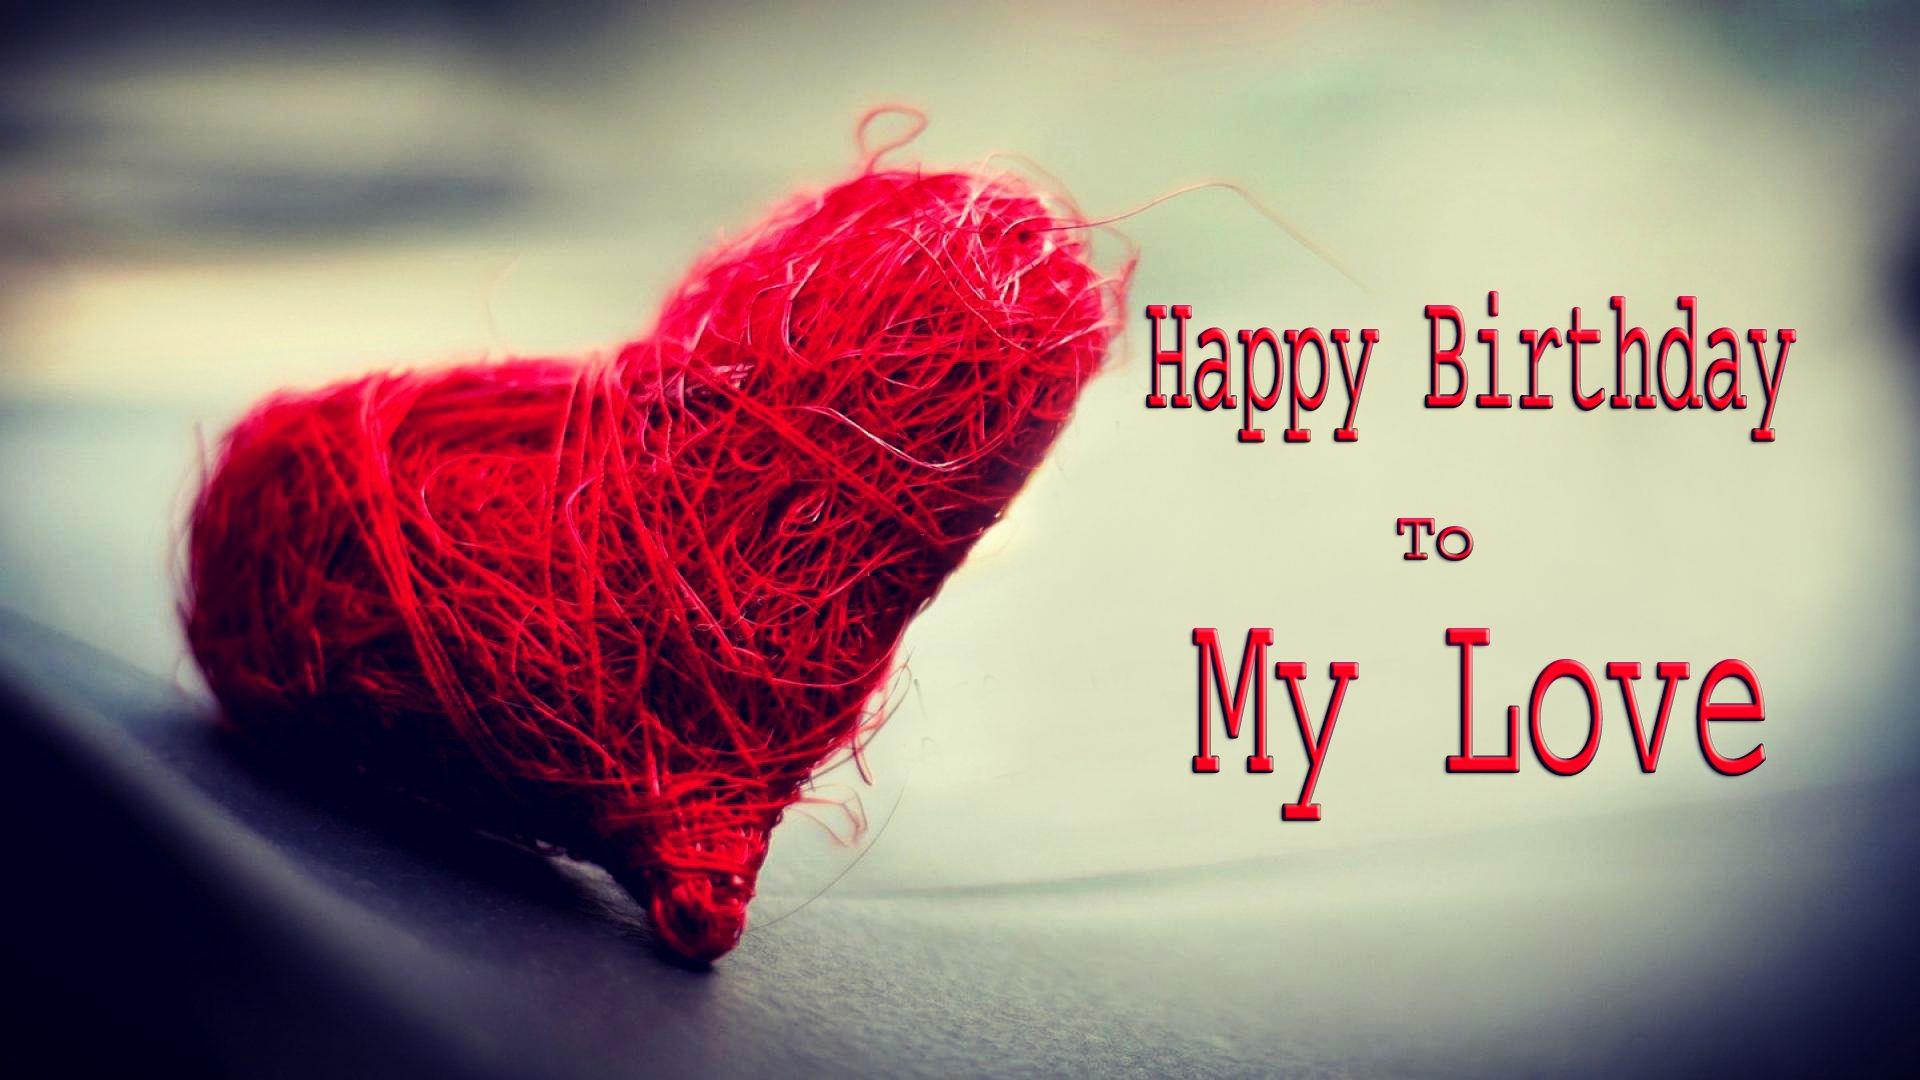 happy-birthday-to-love-hd-wallpapers-messages-quotes-let-us-publish